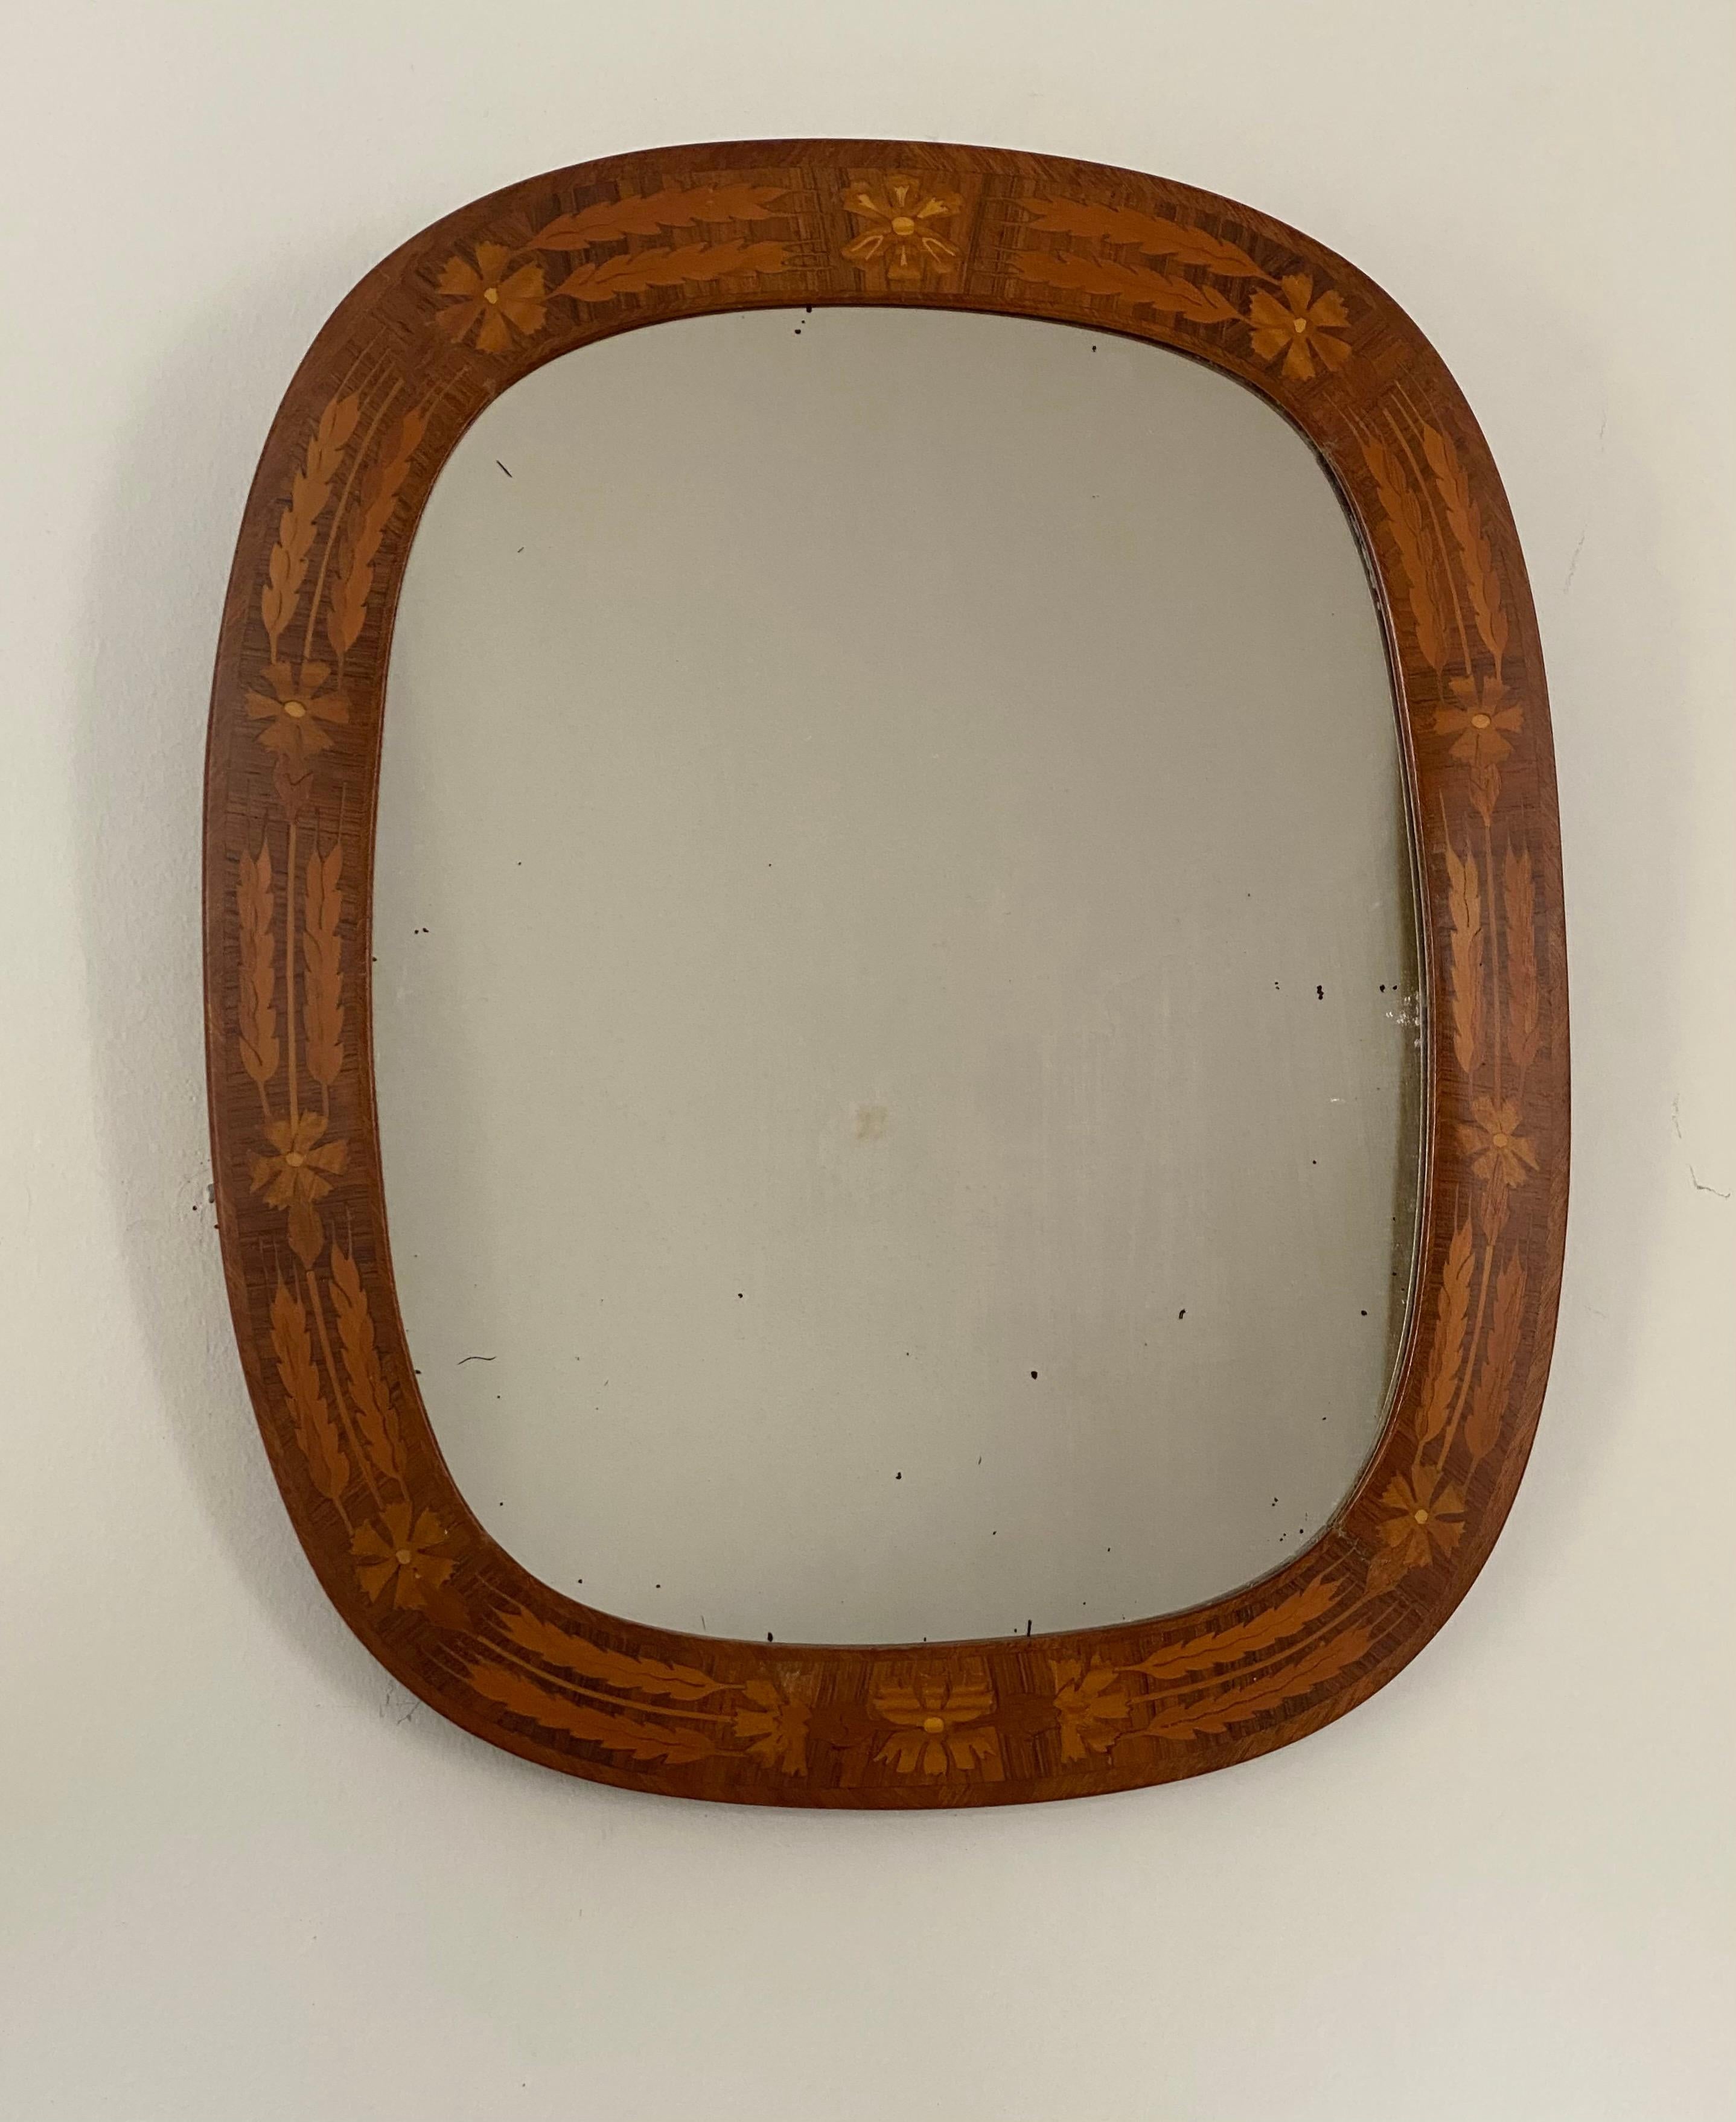 A wall mirror, designed and produced in Sweden, 1940s. Features a wooden frame with wooden inlays.

 